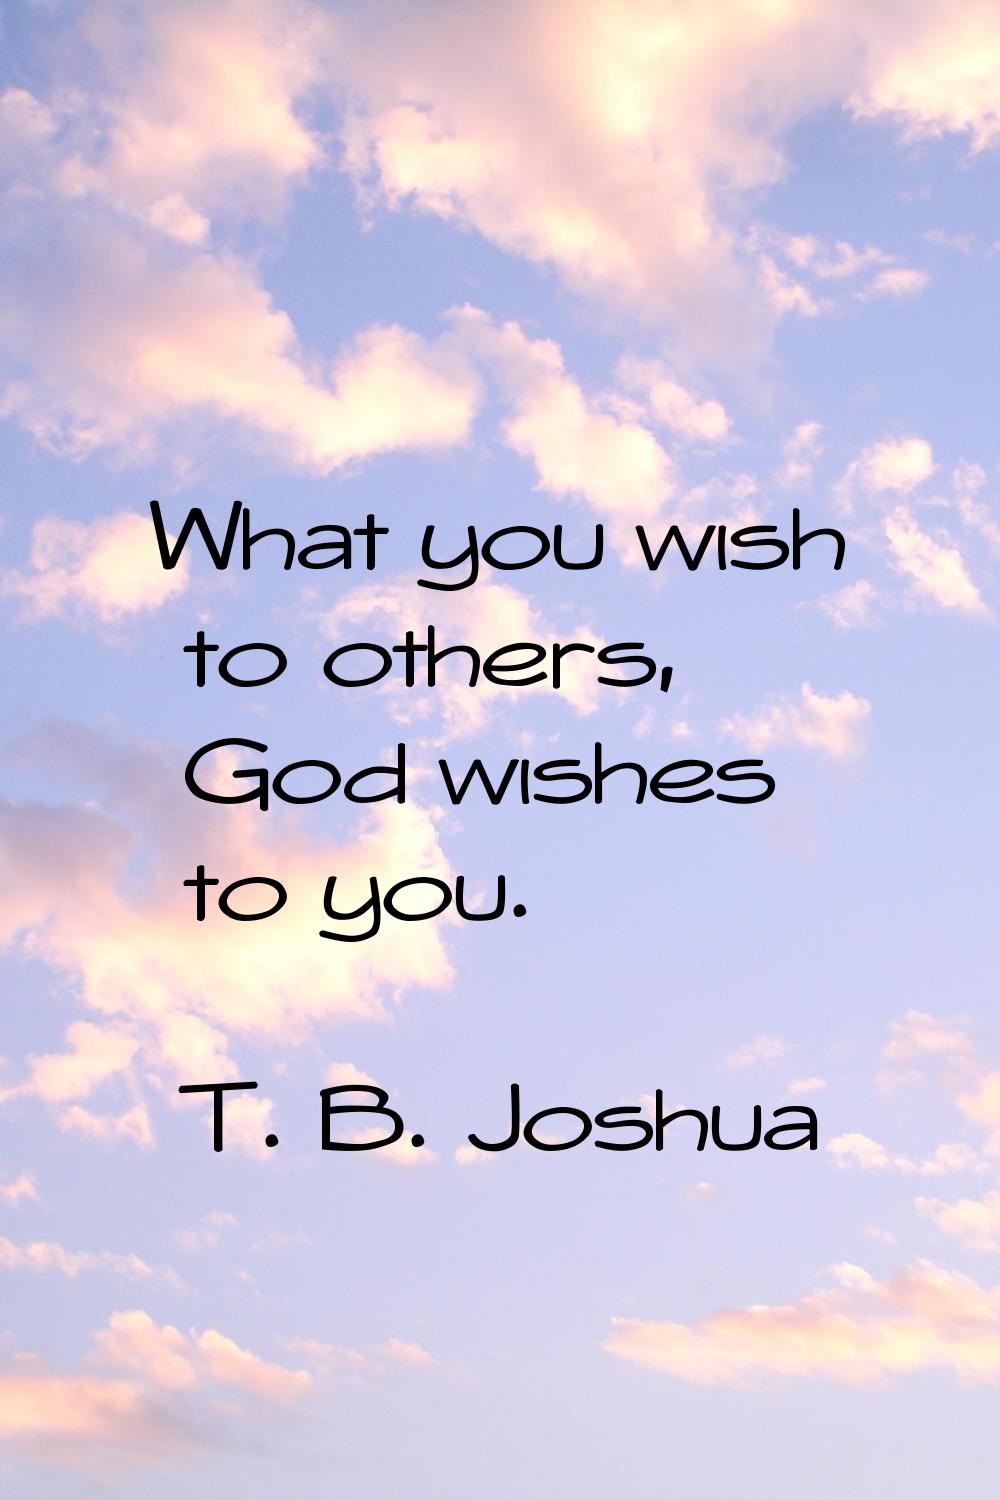 What you wish to others, God wishes to you.